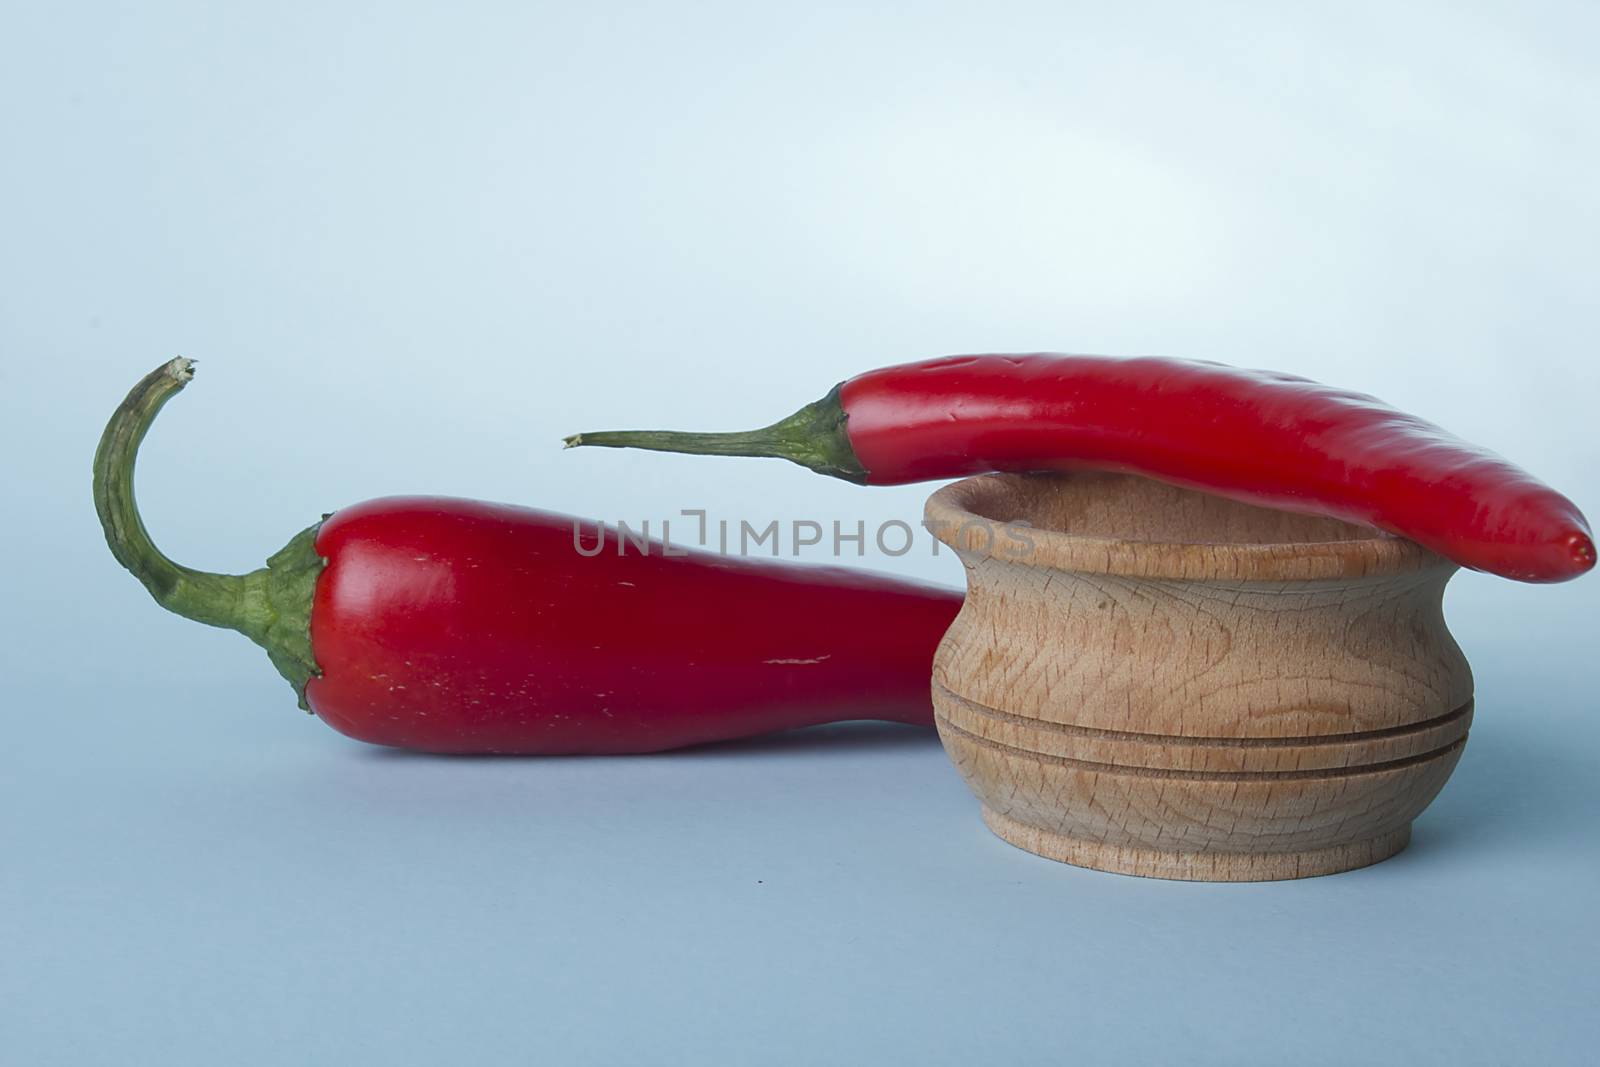 Red pepper and salt shaker on a blue background